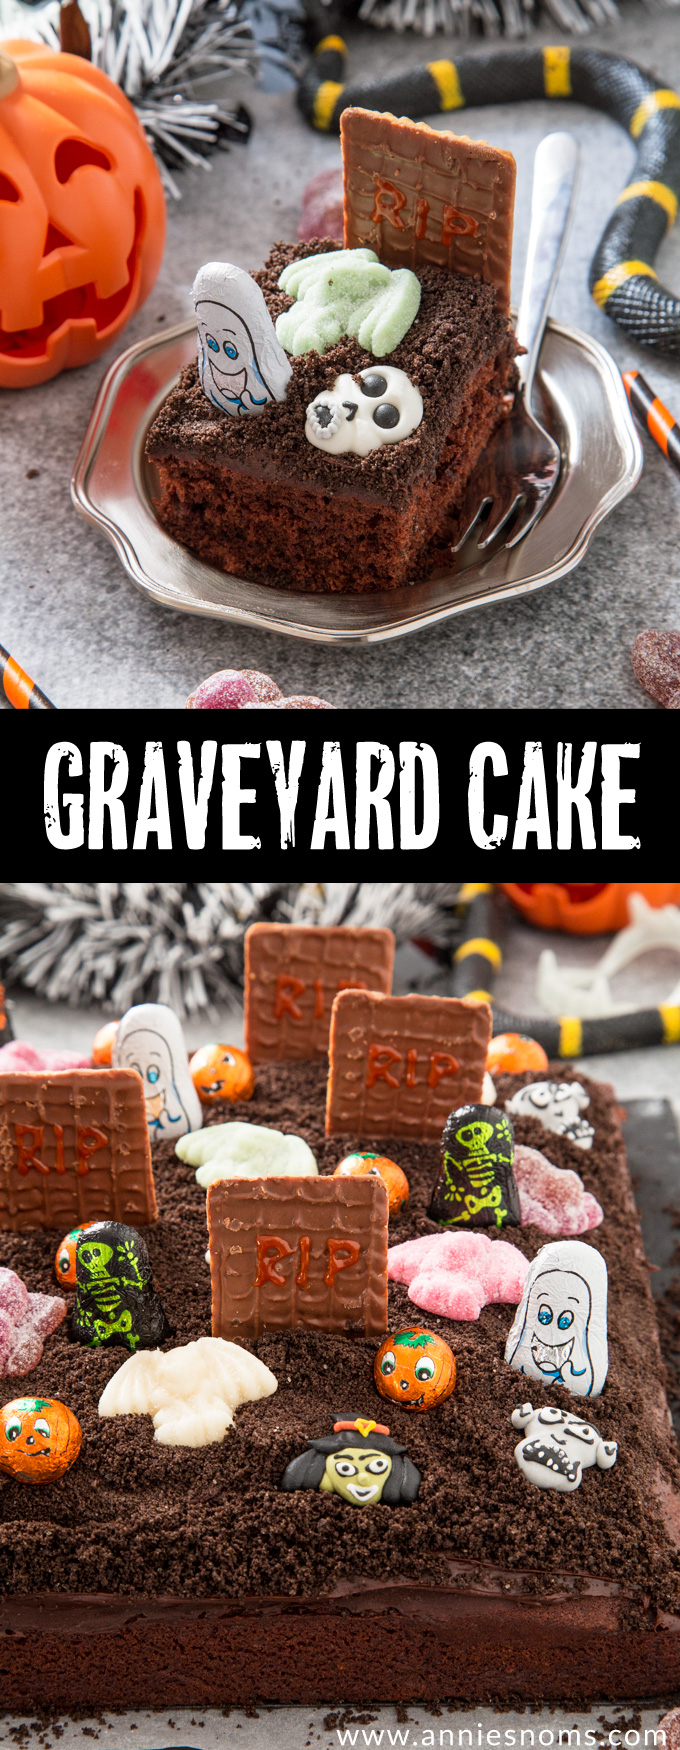 Let the kids go to town with Halloween themed decorations and create your very own delicious Graveyard Cake with a rich chocolate cake base, chocolate frosting and Oreo soil!